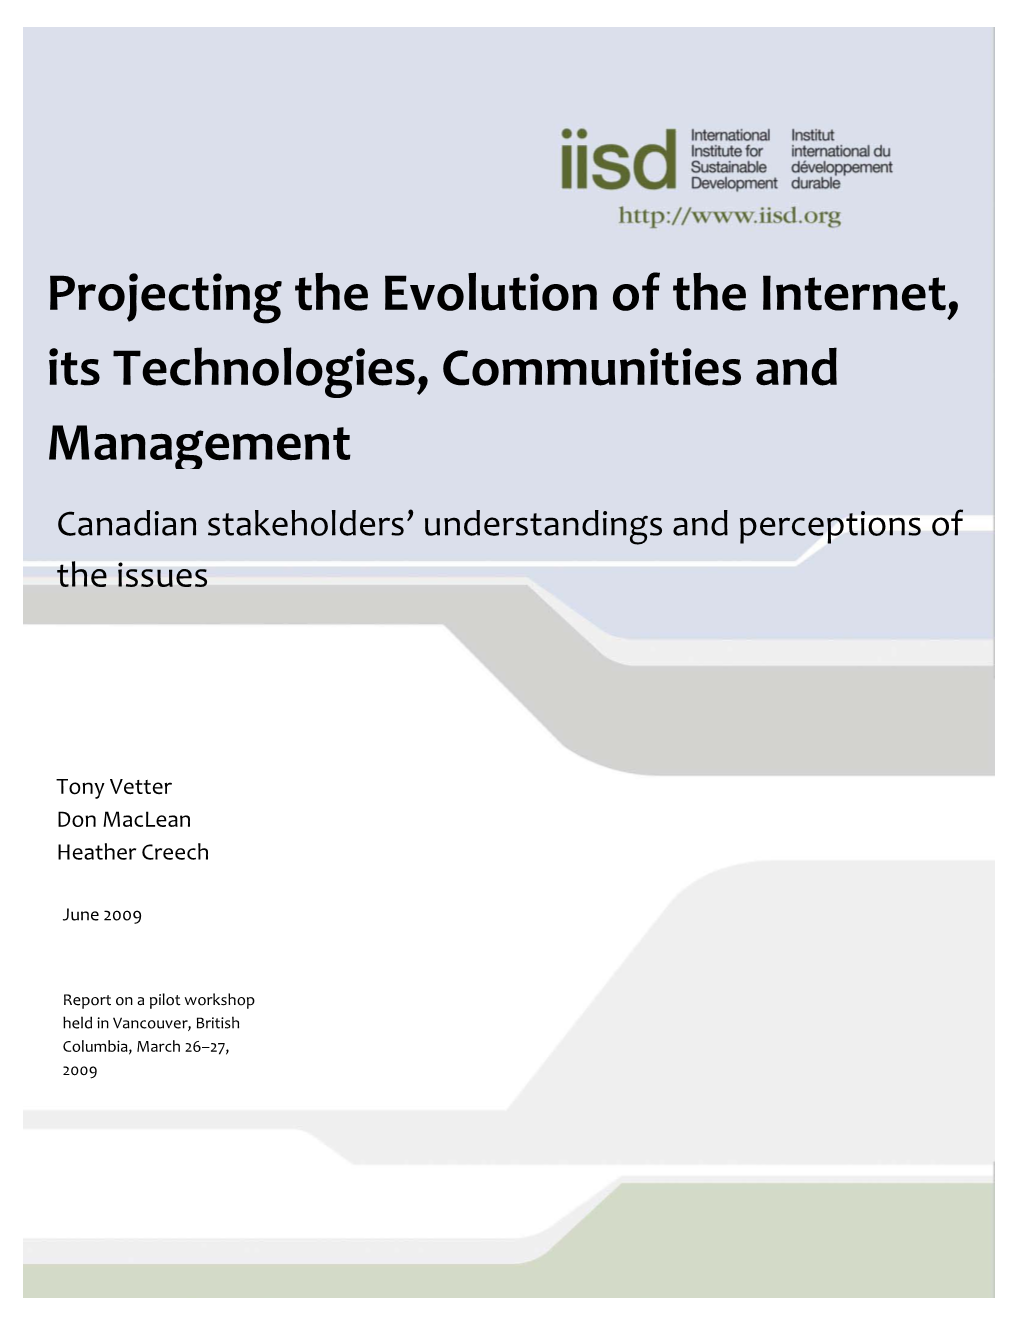 Projecting the Evolution of the Internet, Its Technologies, Communities and Management